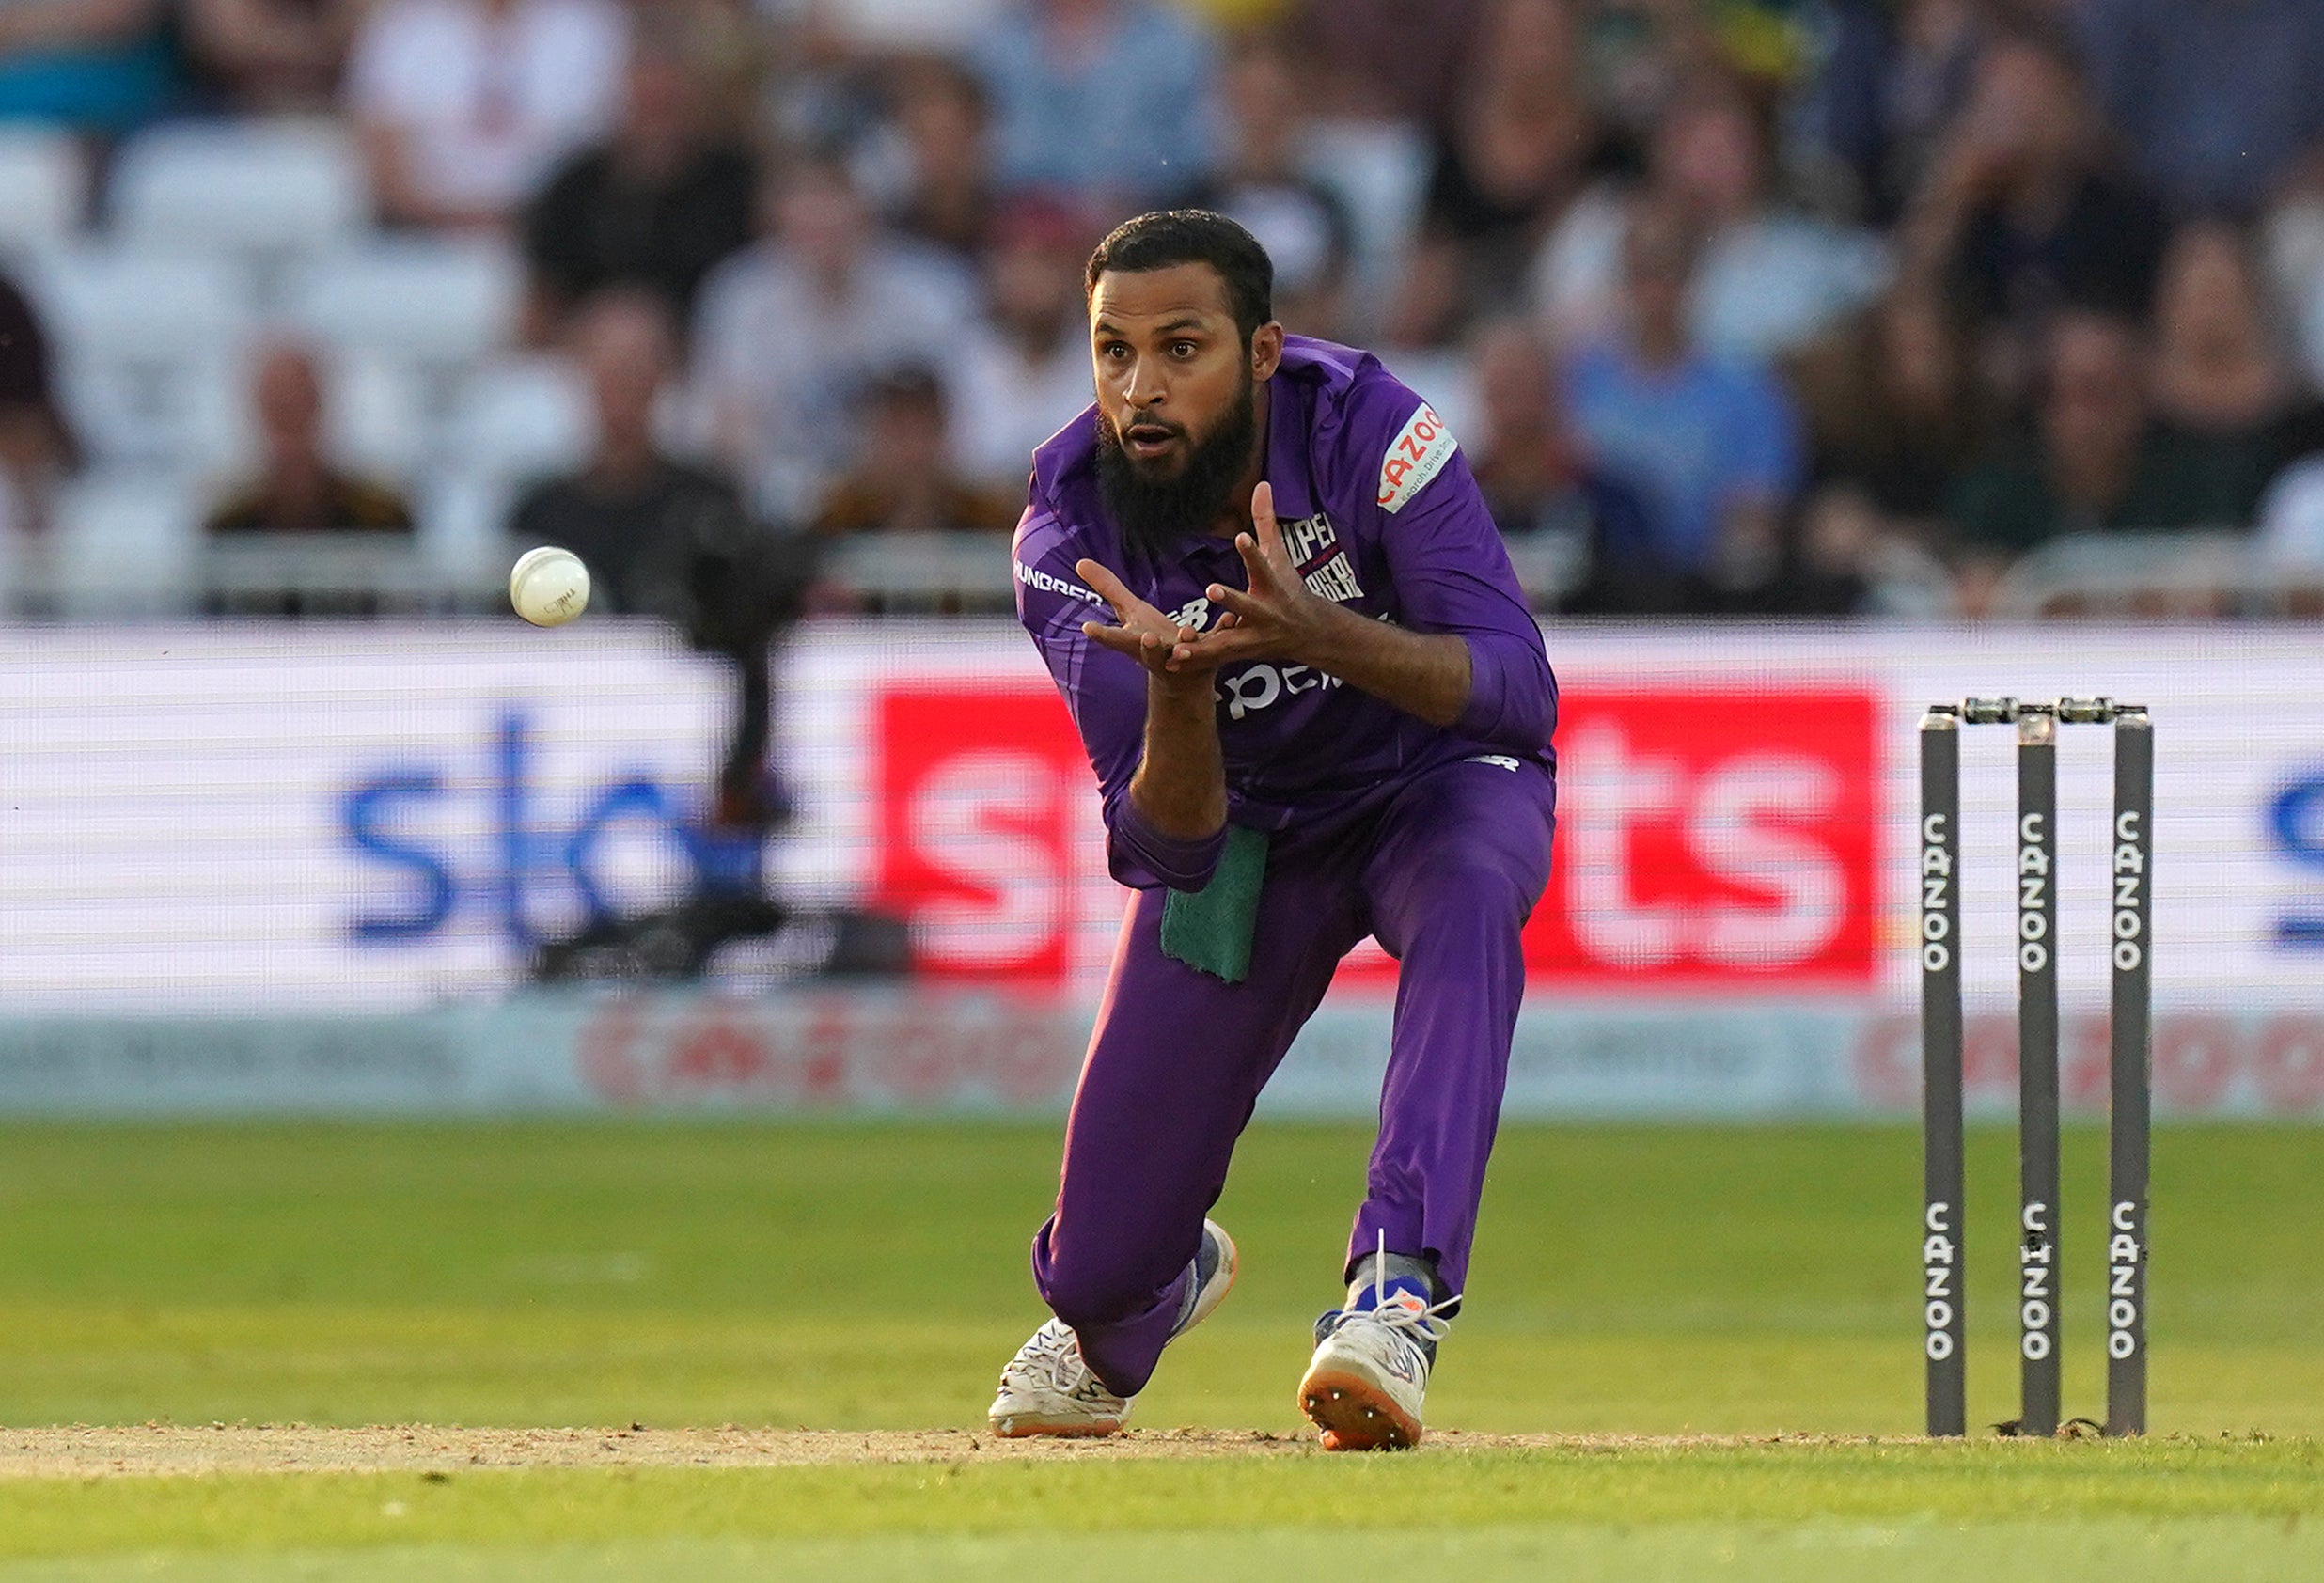 Adil Rashid has supported claims made by Azeem Rafiq about former England captain Michael Vaughan